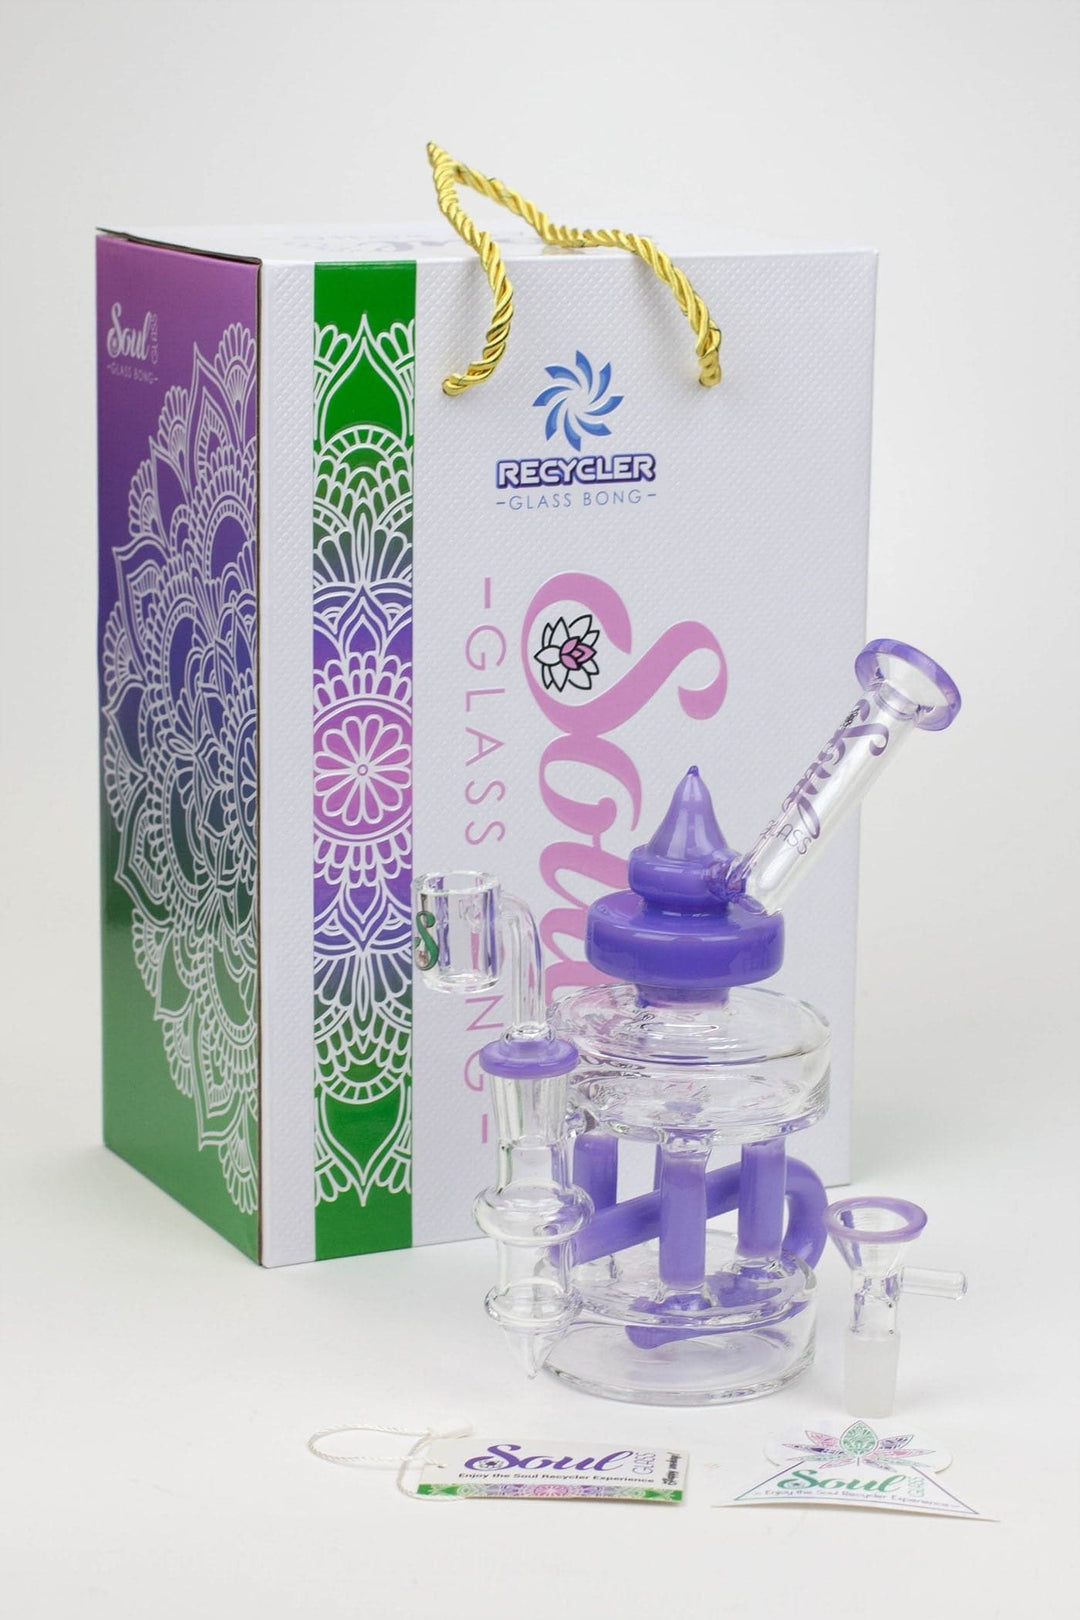 Soul glass 2-in-1 double deck recycler water pipes_3